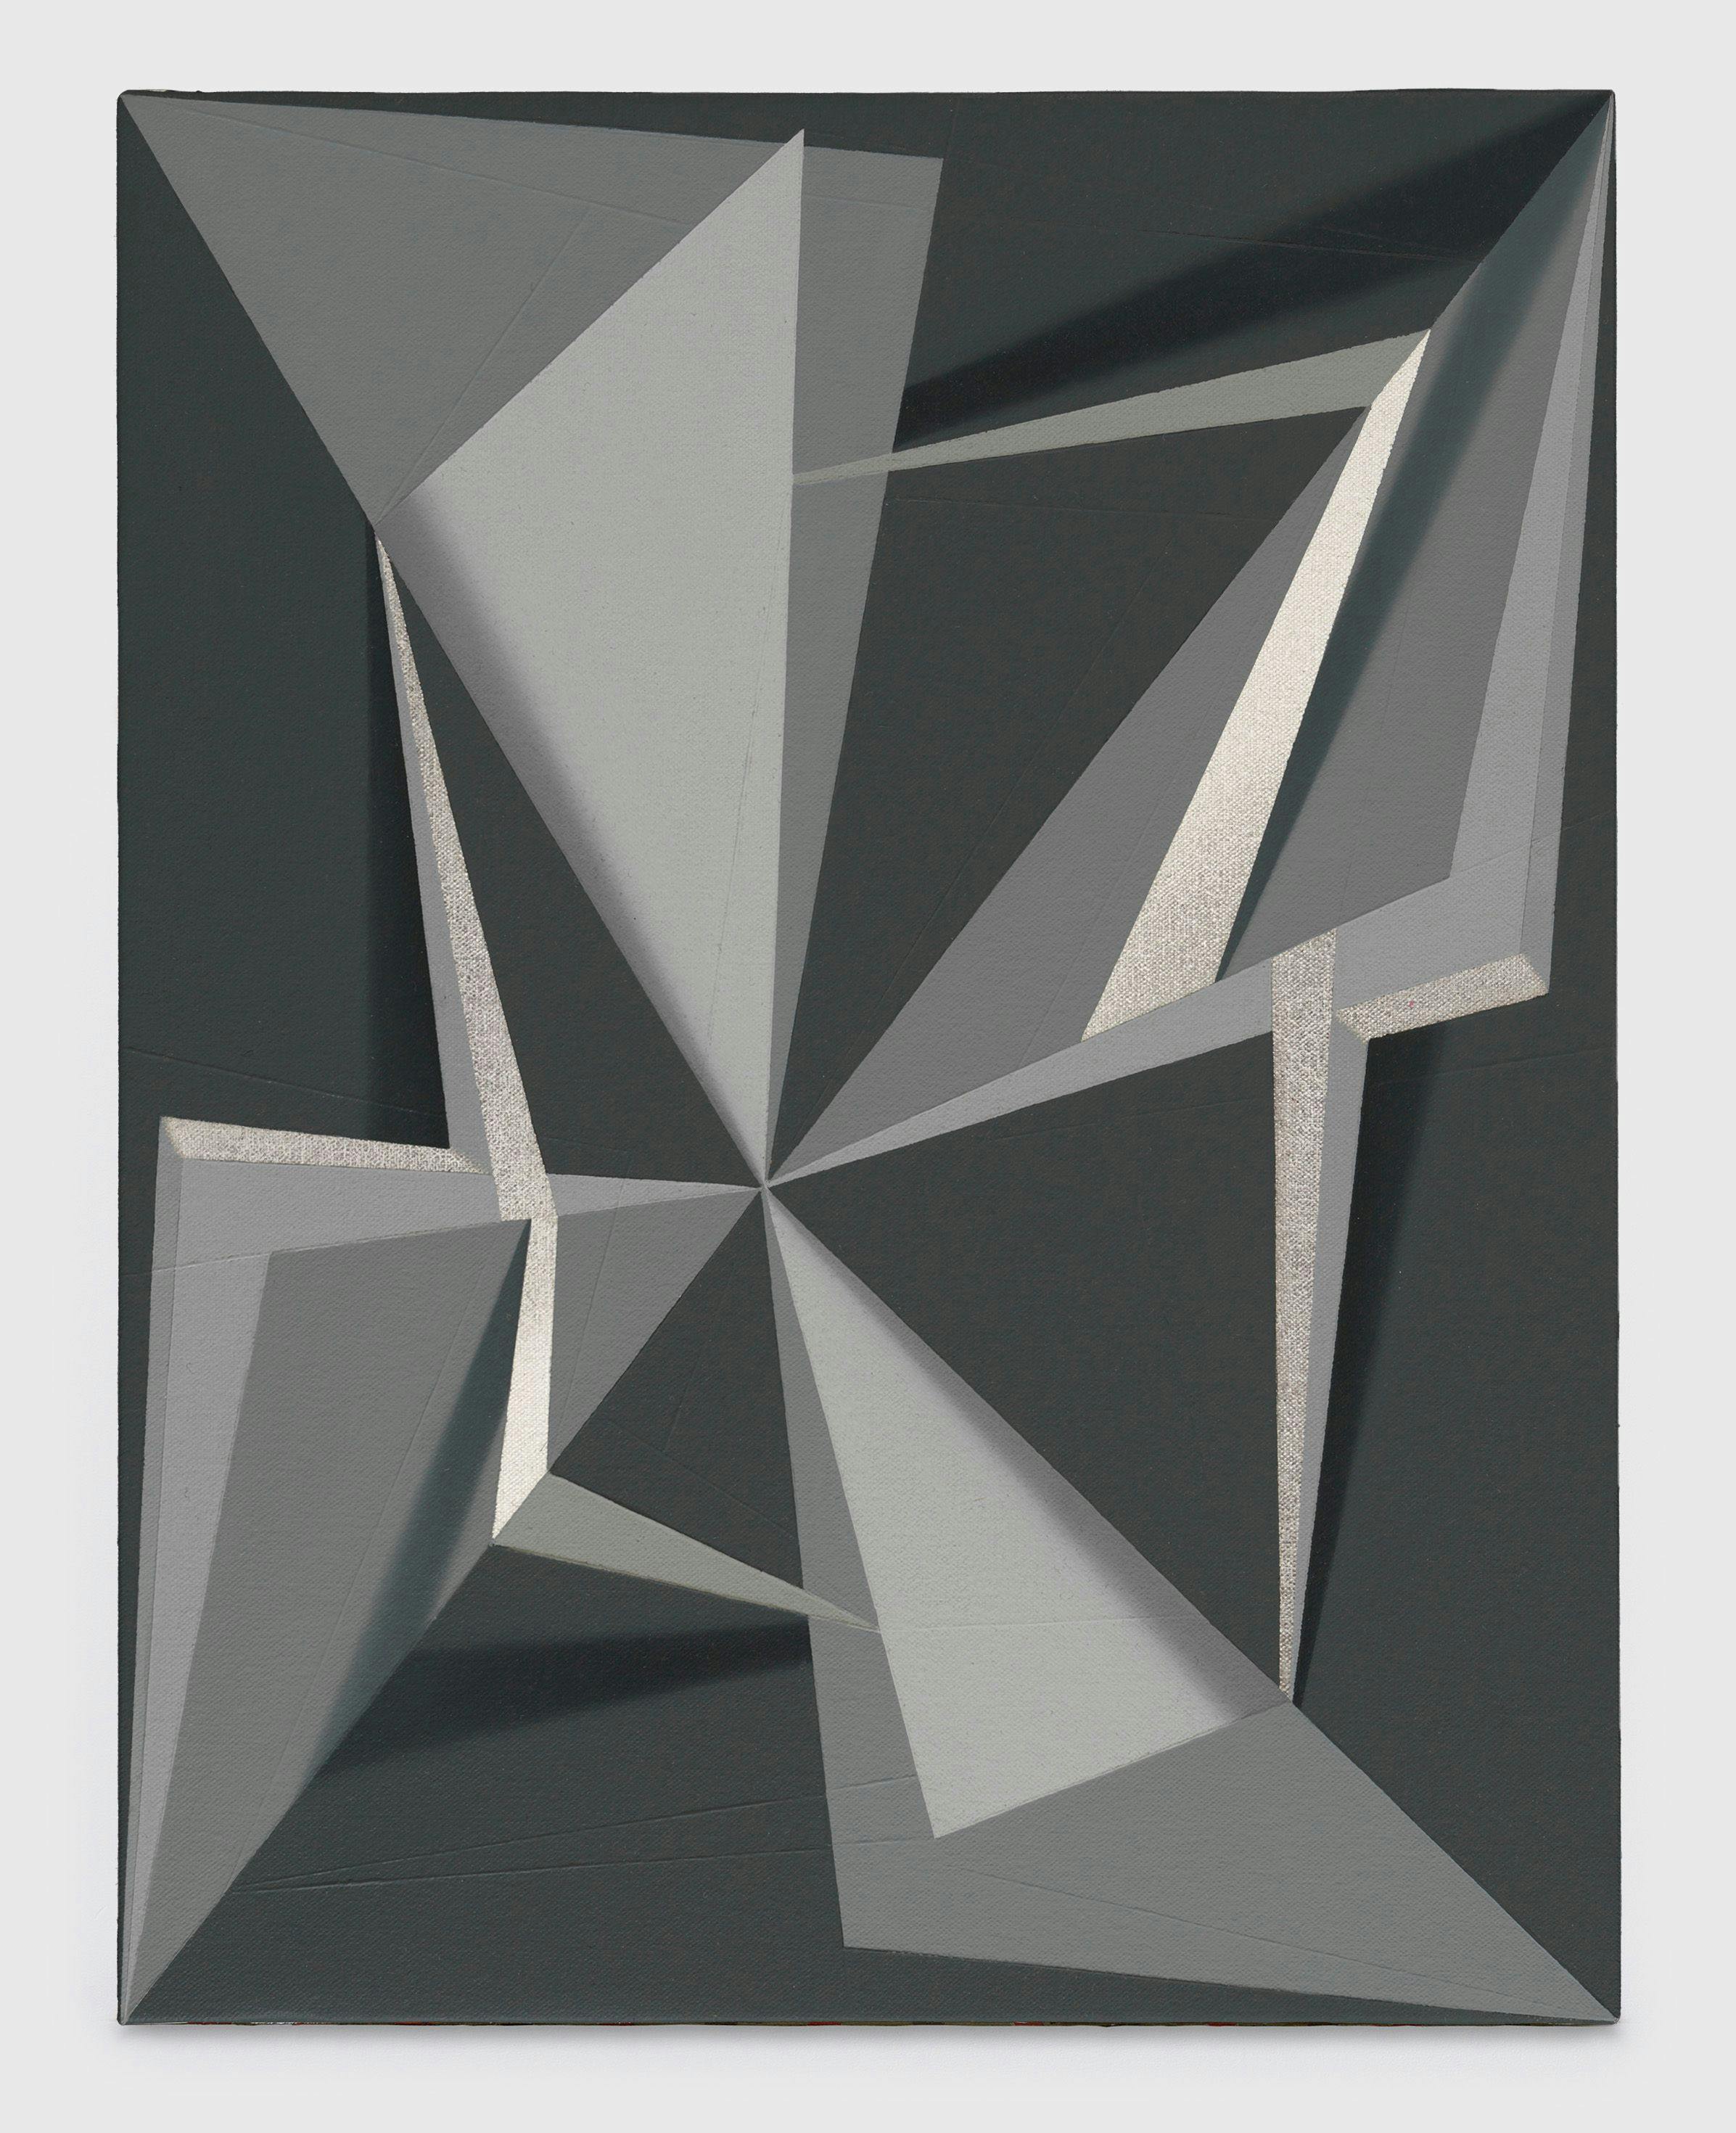 A painting by Tomma Abts, titled Eylt, dated 2019.